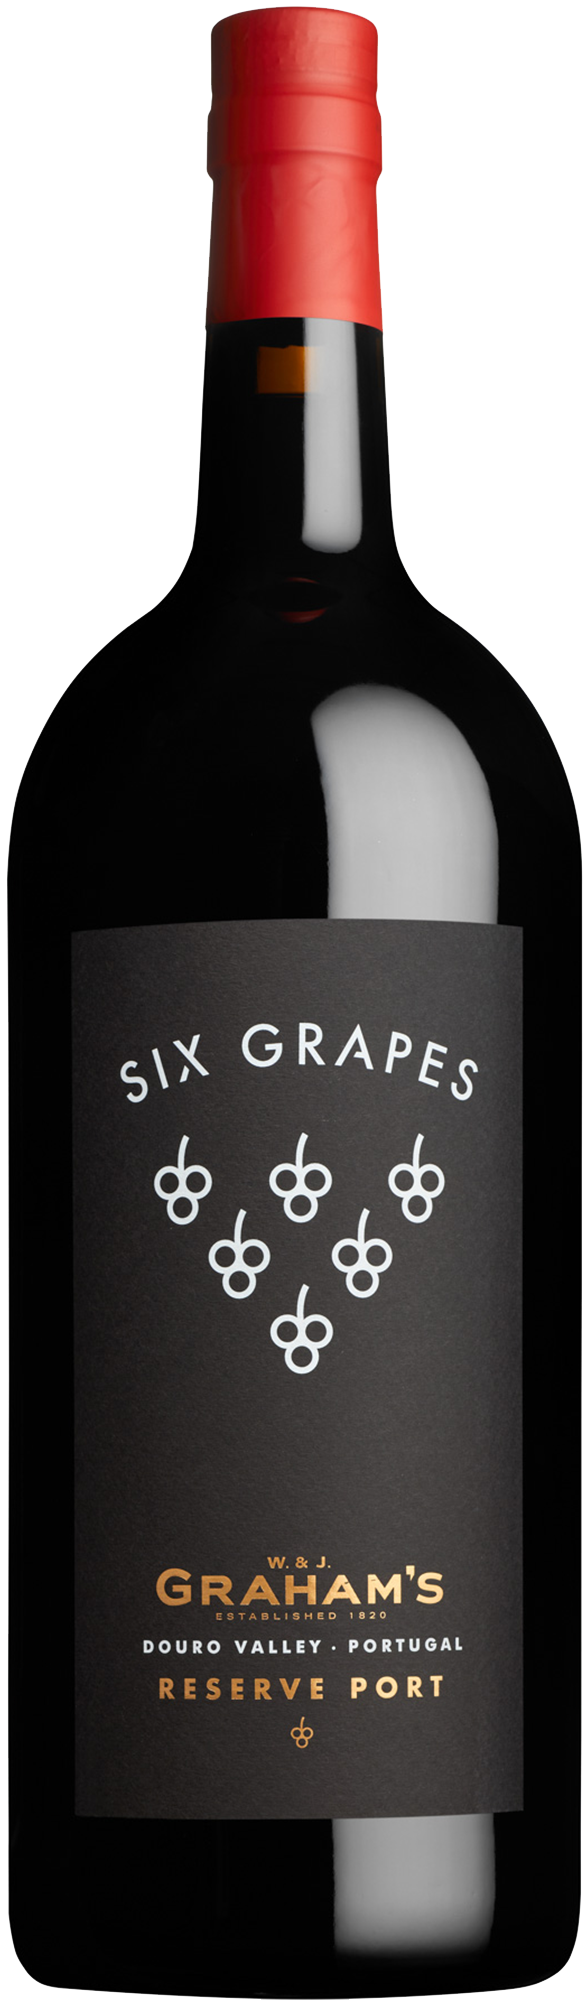 Product Image for GRAHAM'S SIX GRAPES RESERVE PORT - 3L